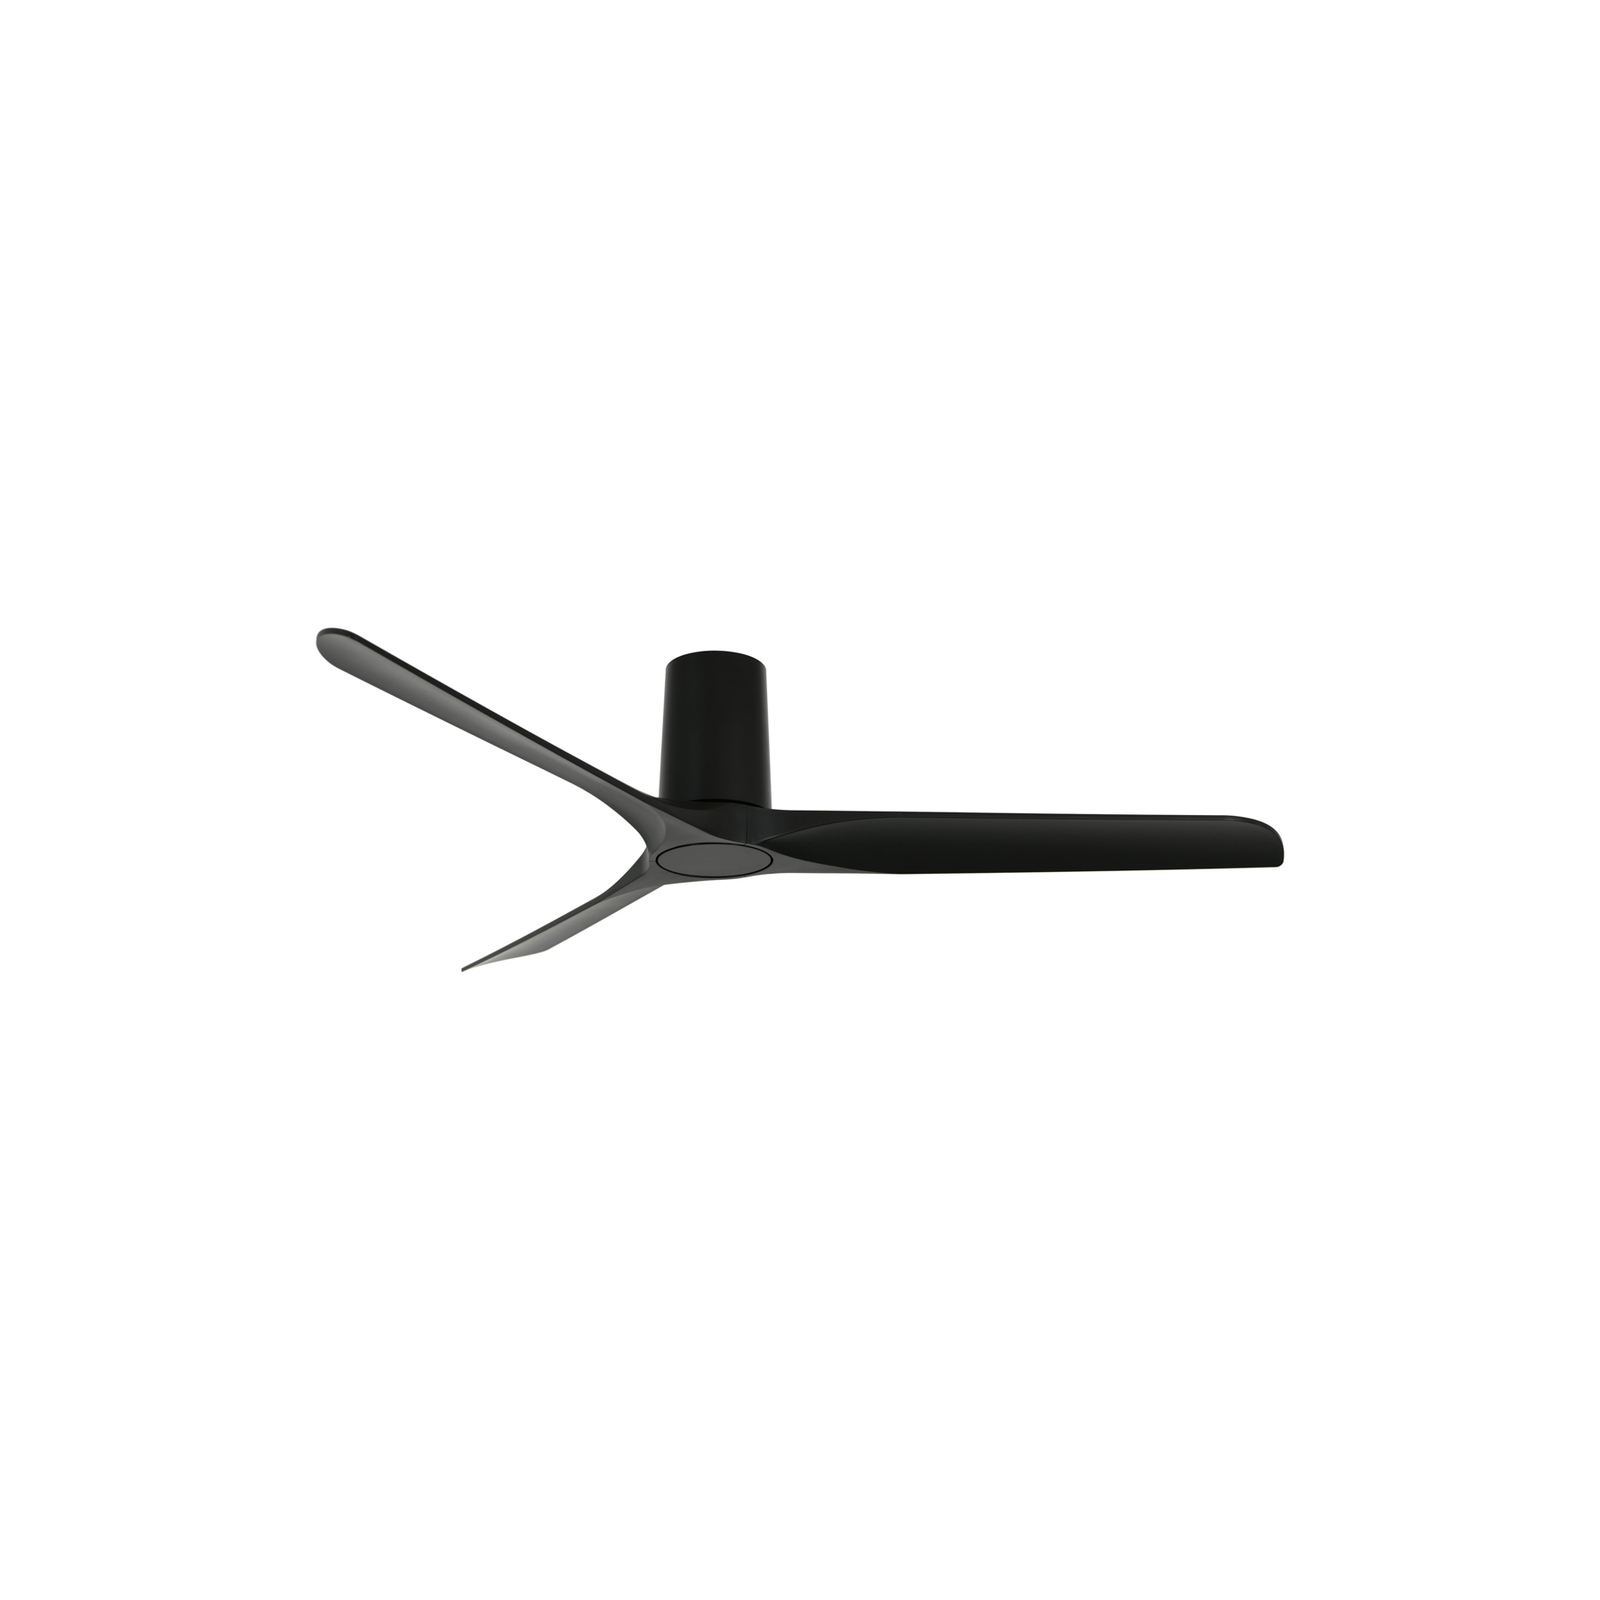 Londo ceiling fan with a remote control, black